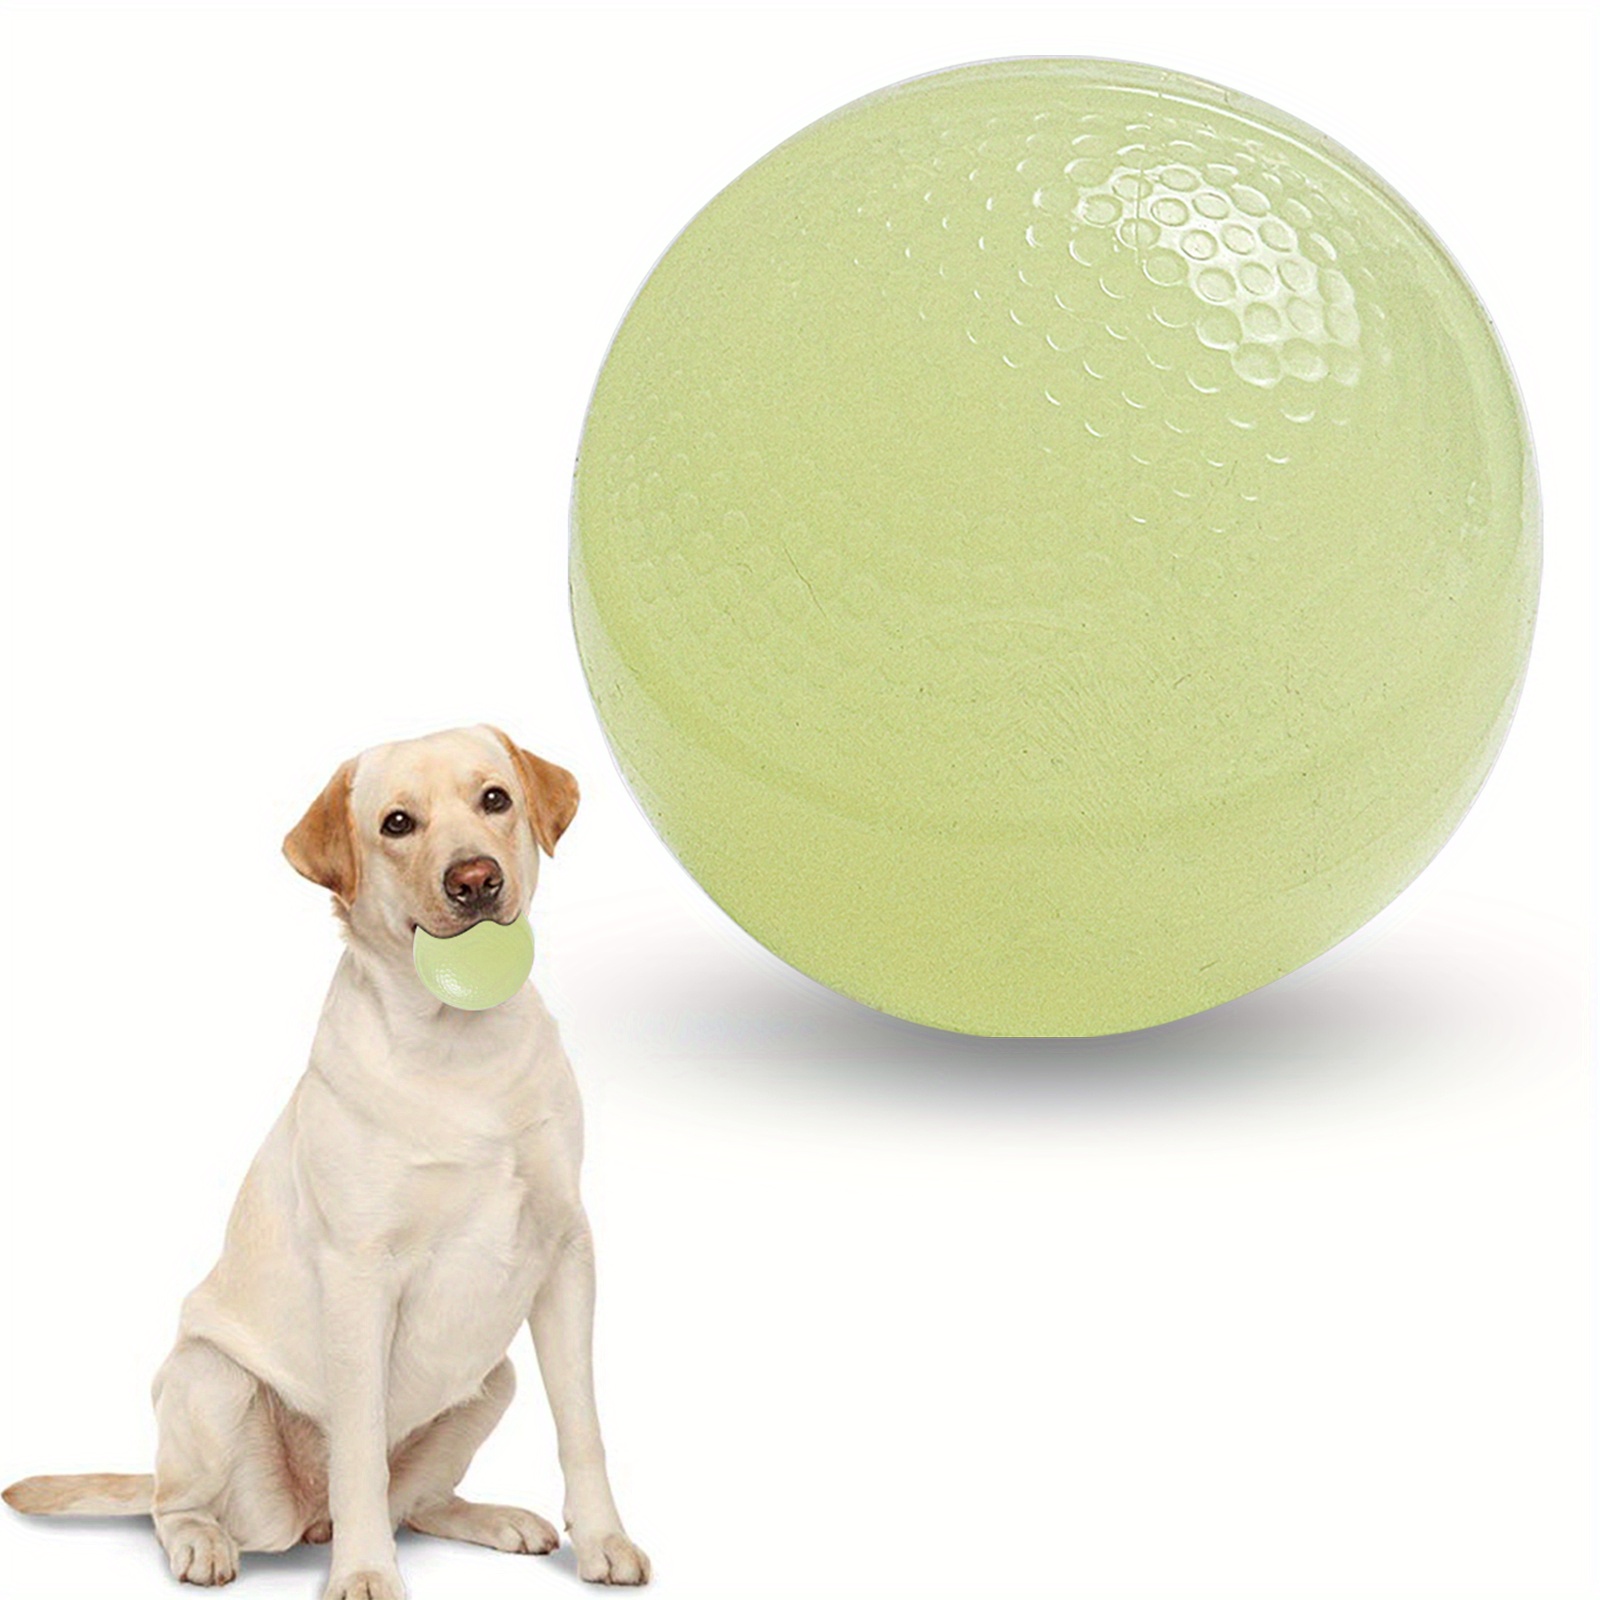 Dog Ball, Interactive Dog Toys Ball,Squeaky Dog Toys Ball,Glow Giggle Ball in The Dark for Training Teeth Cleaning Herding Balls Indoor Outdoor Safe